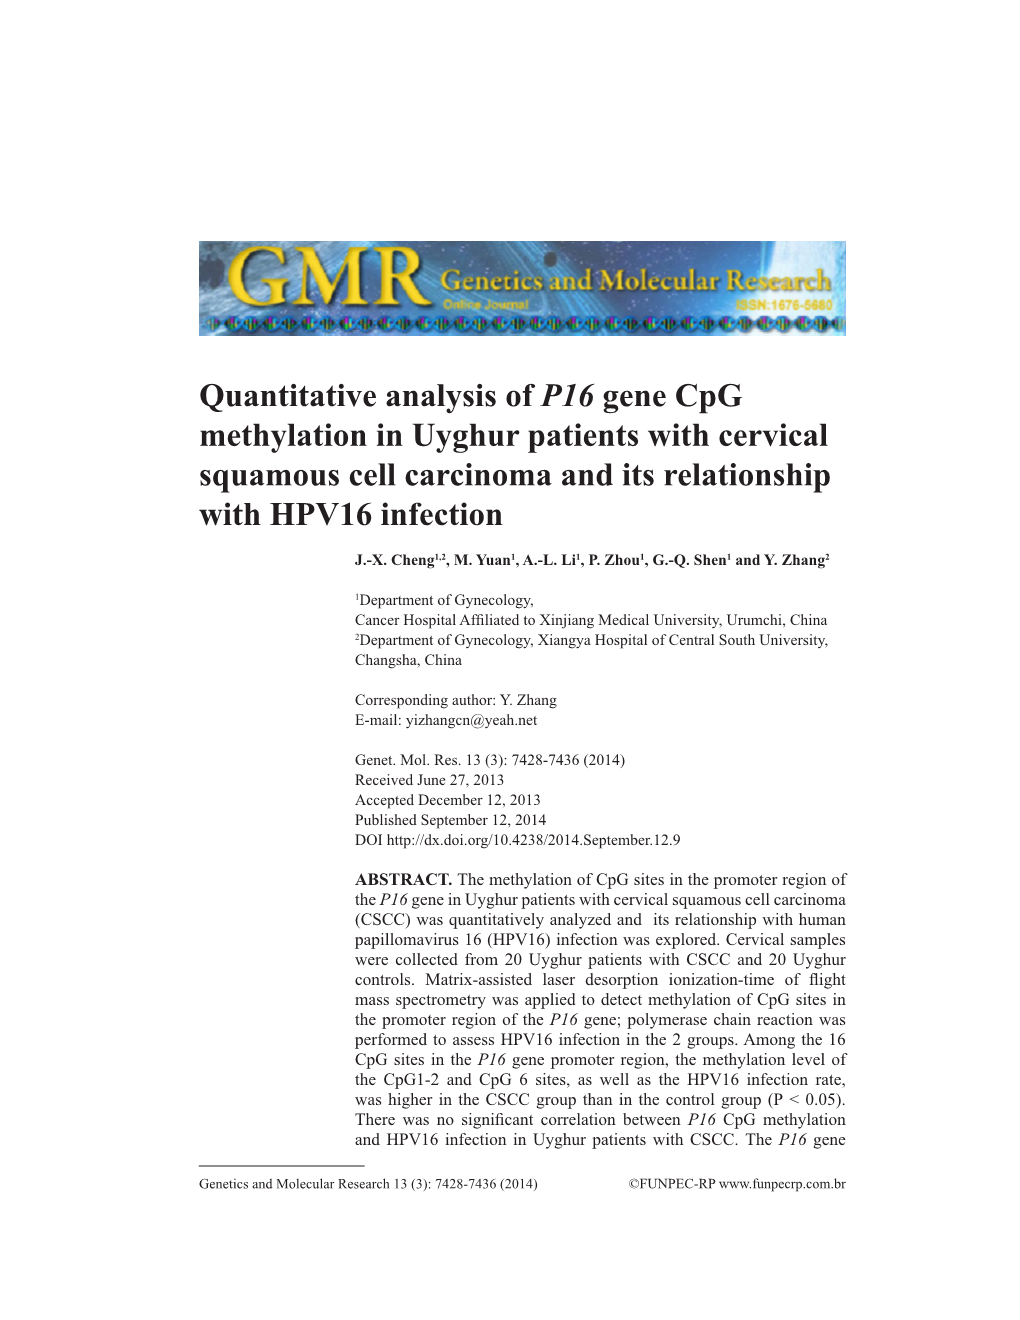 Quantitative Analysis of P16 Gene Cpg Methylation in Uyghur Patients with Cervical Squamous Cell Carcinoma and Its Relationship with HPV16 Infection